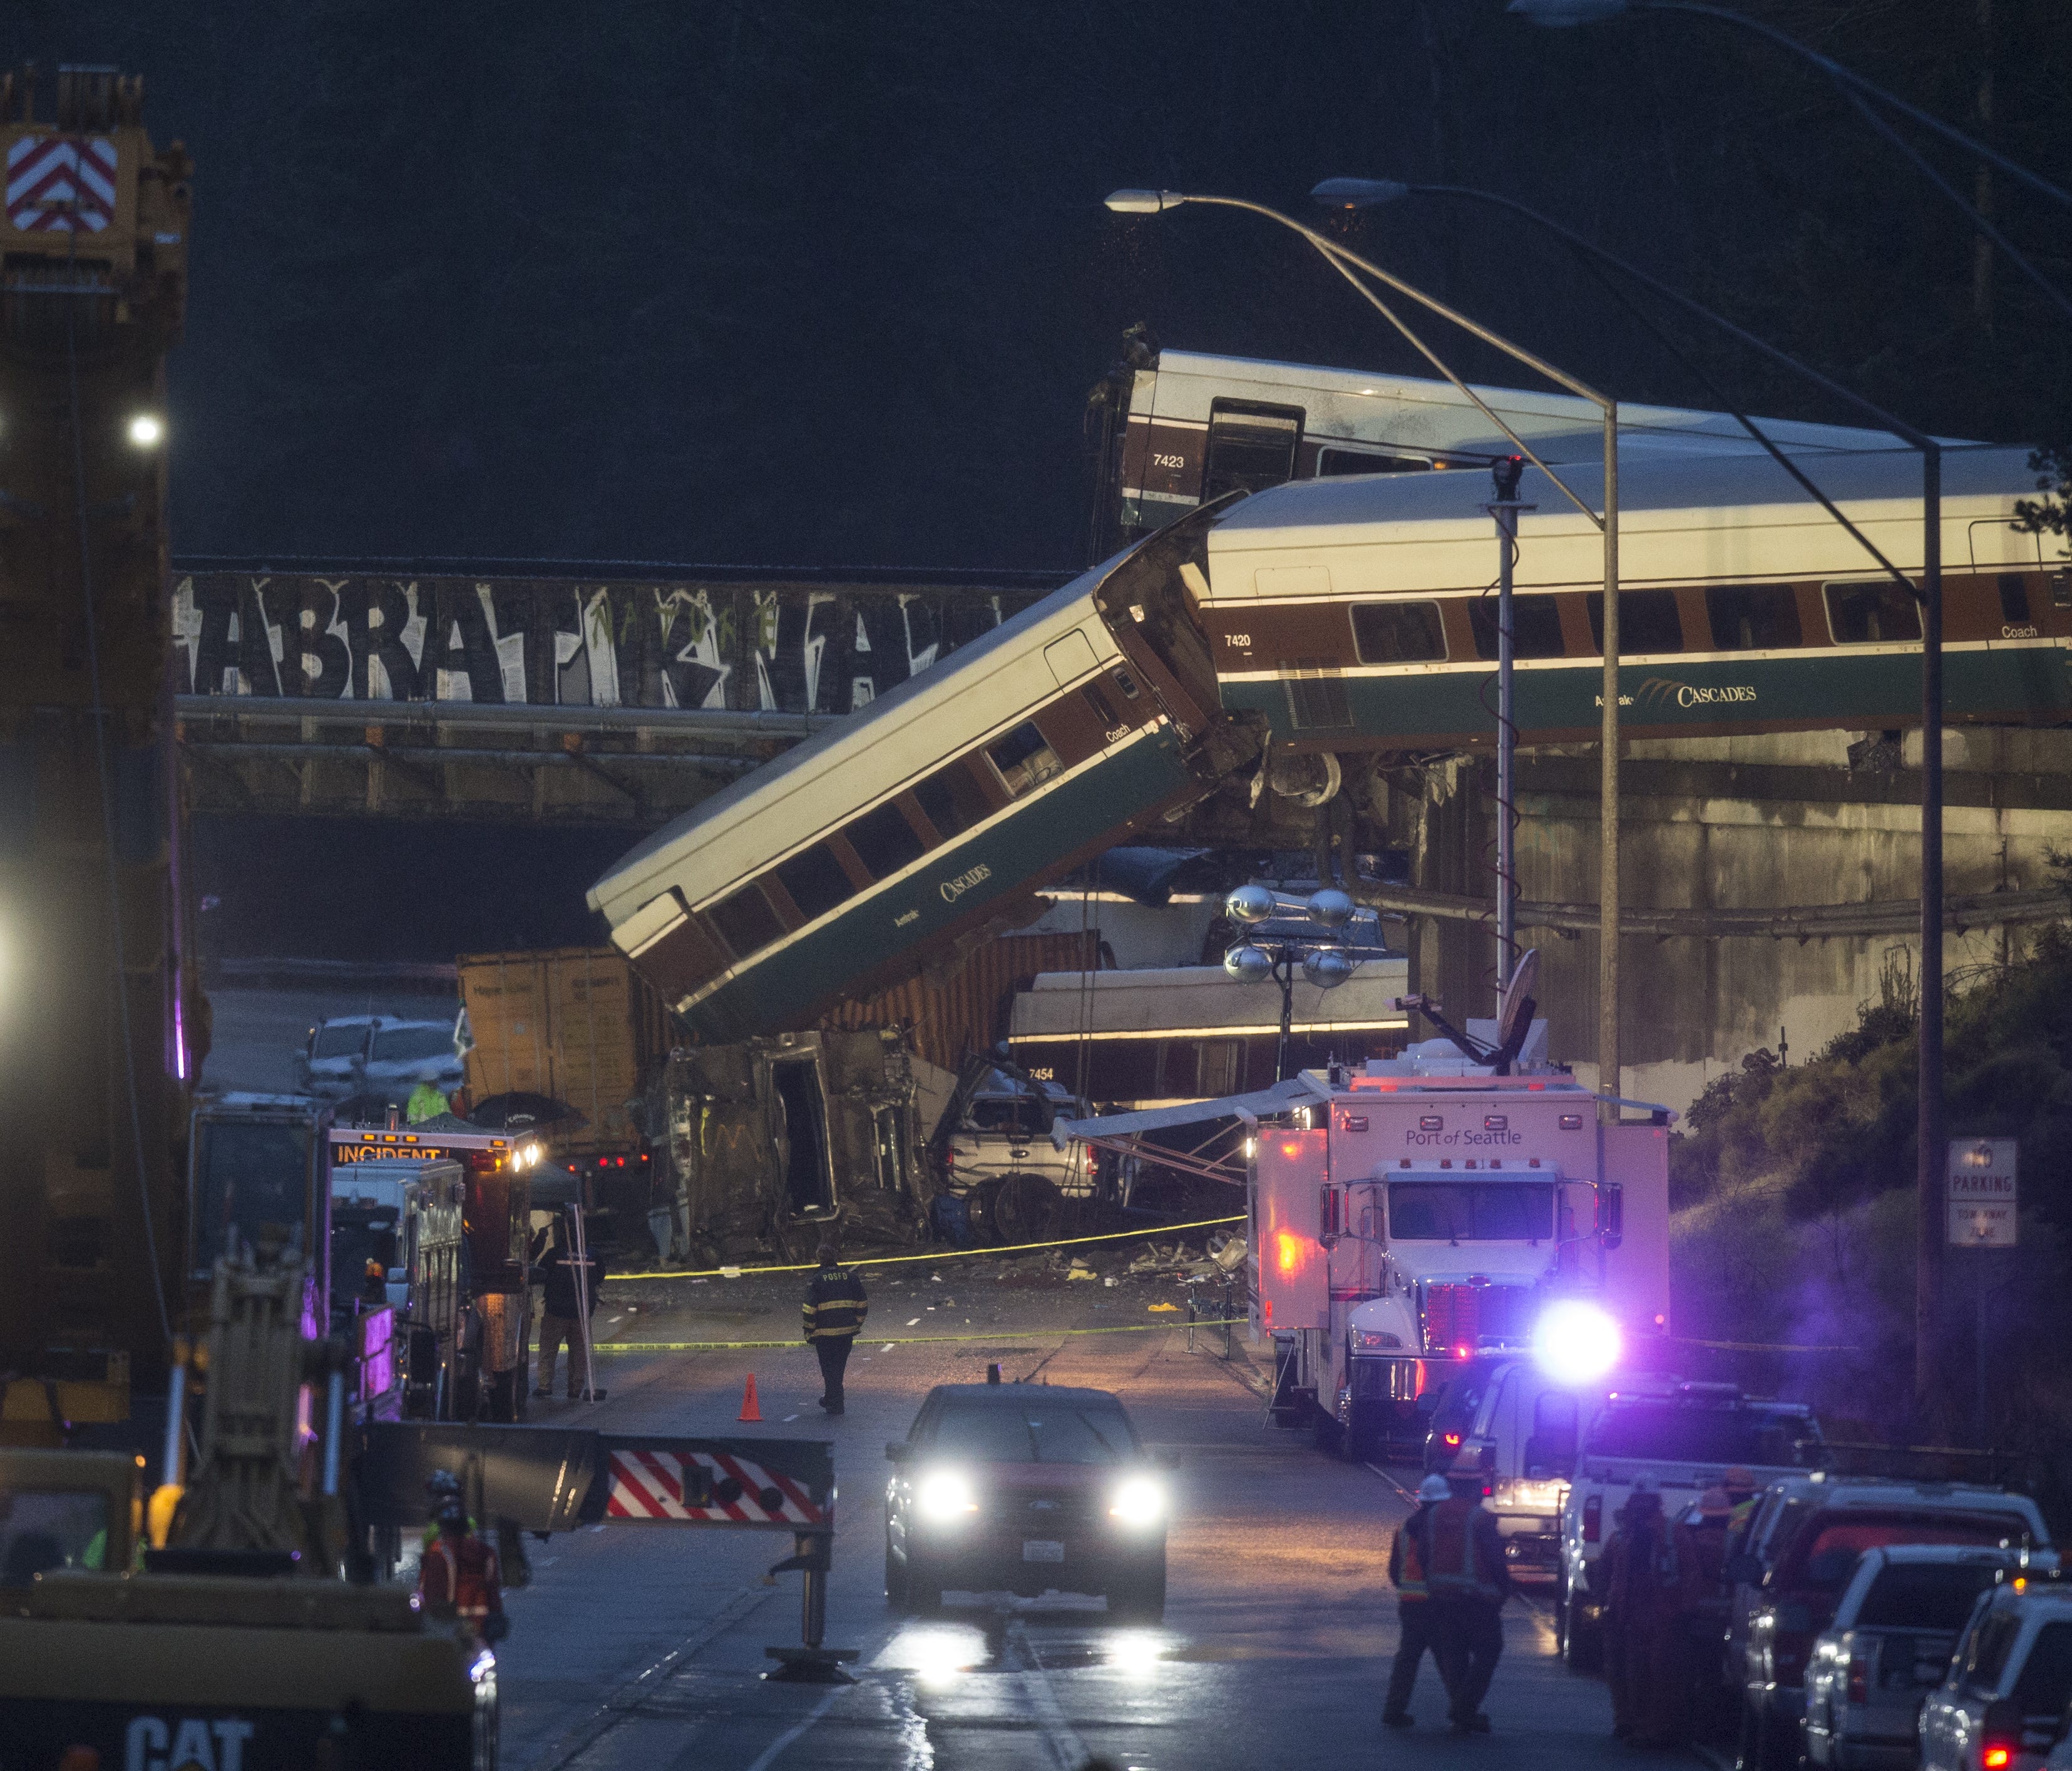 Work crews prepare to clear southbound Interstate-5 lanes at the scene of an Amtrak train derailment in DuPont, Wash.